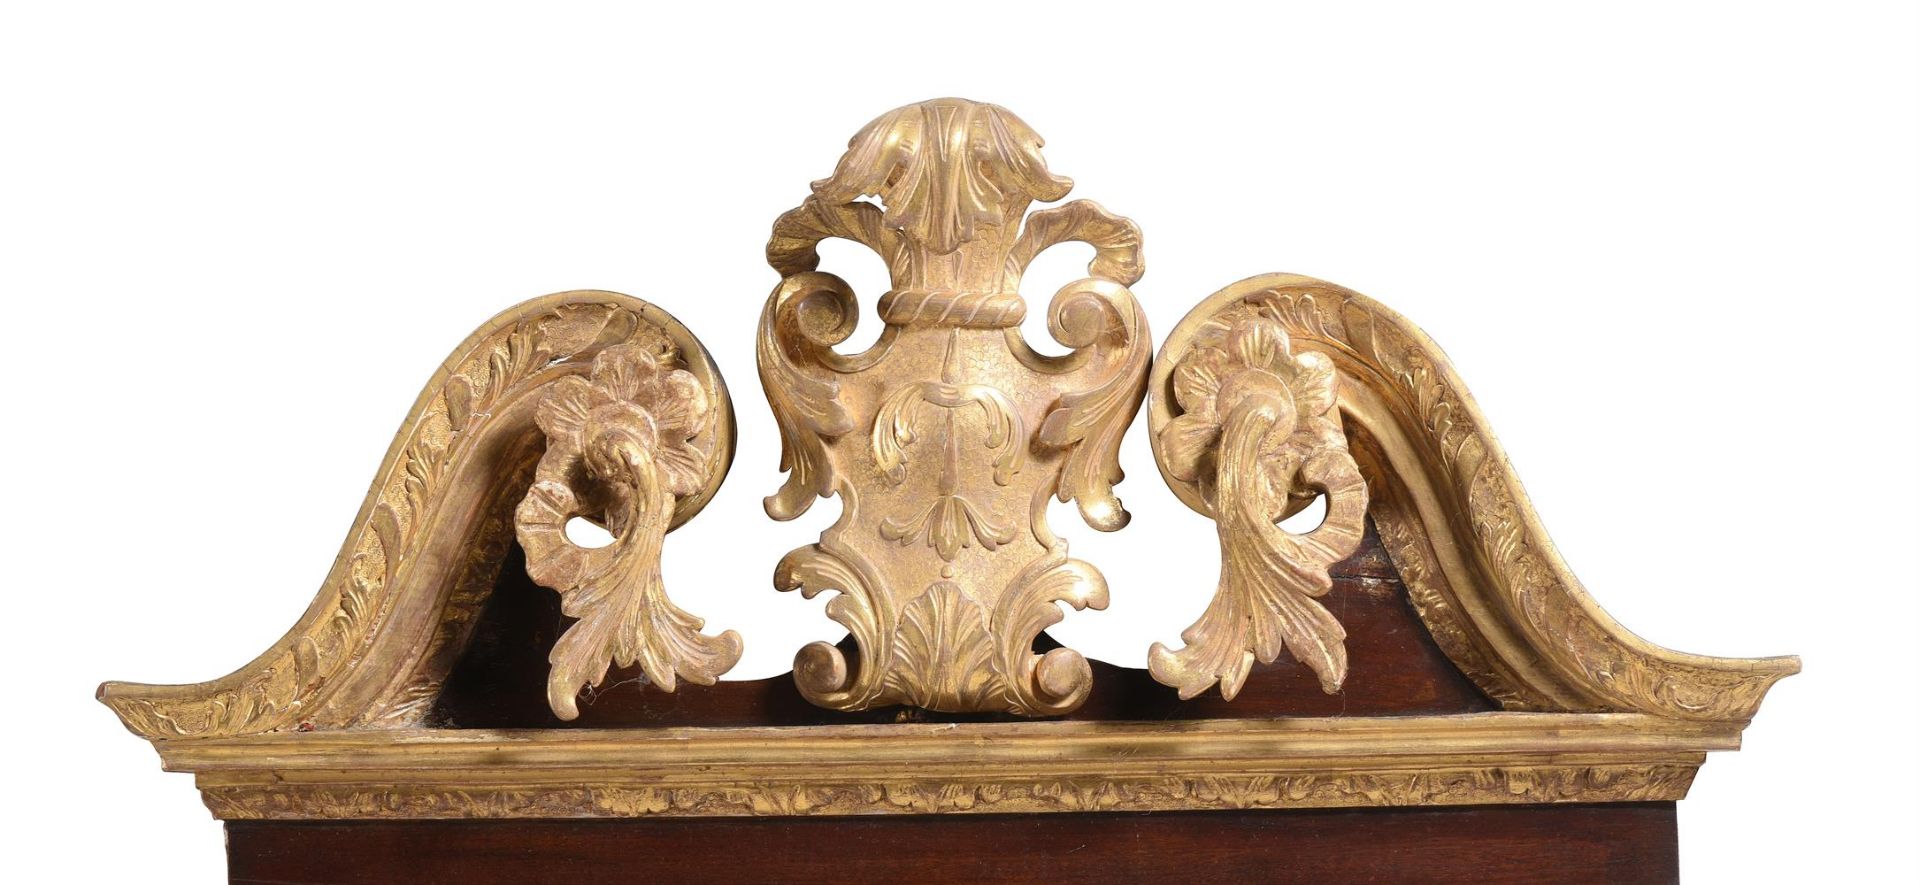 A GEORGE II MAHOGANY AND PARCEL GILT MIRROR, MID 18TH CENTURY - Image 2 of 3